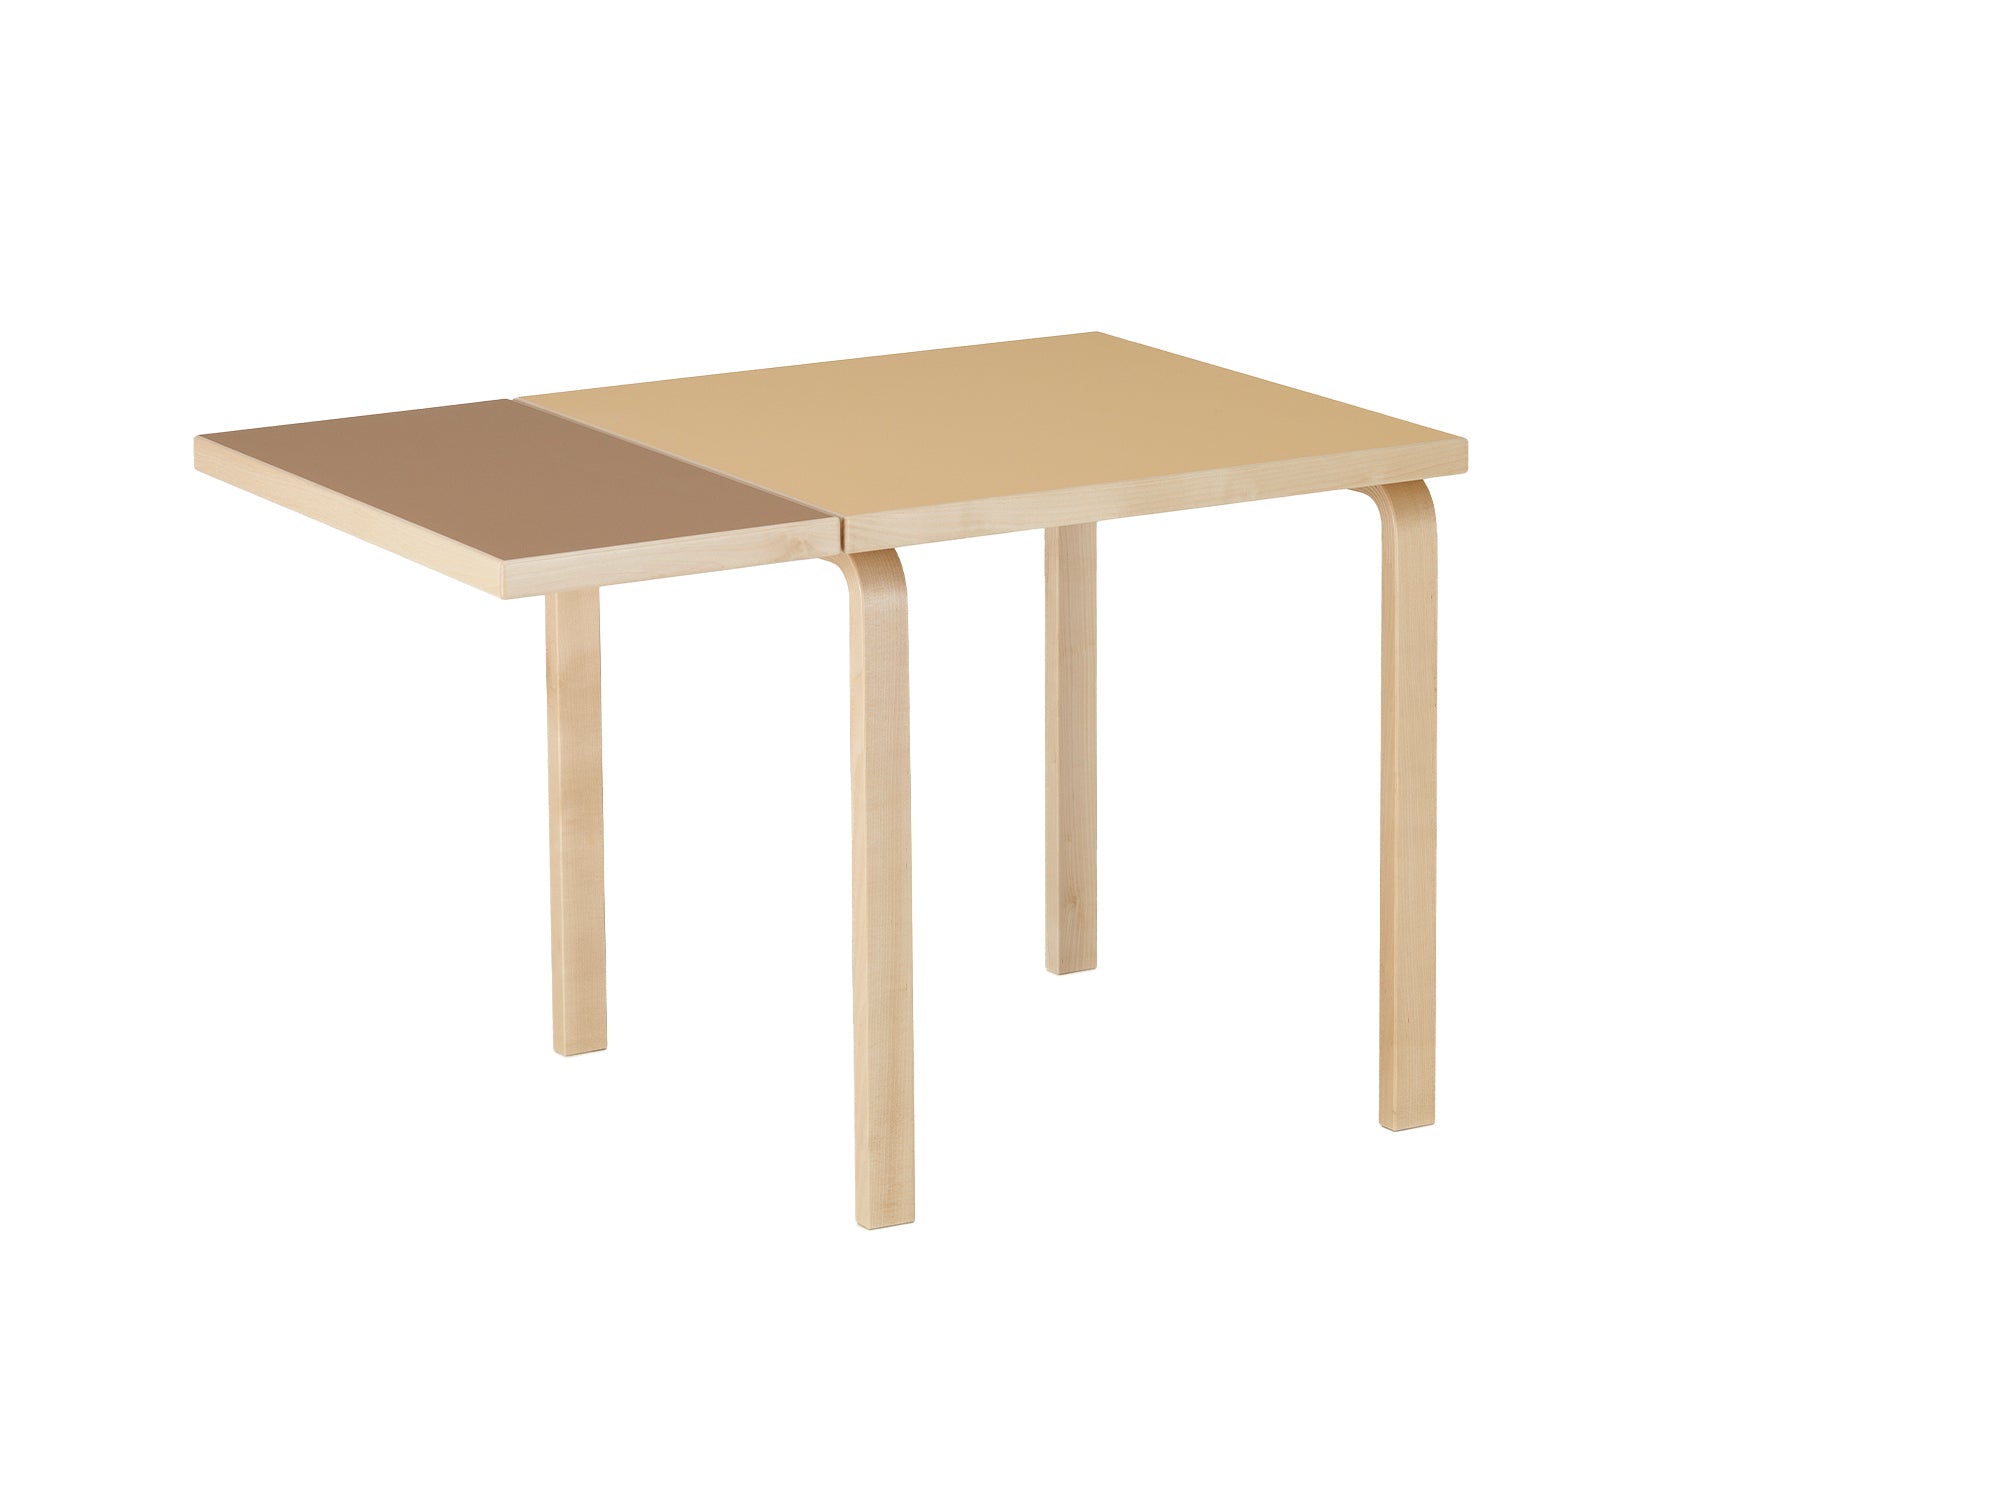 Aalto Table Foldable by Artek – Really Well Made